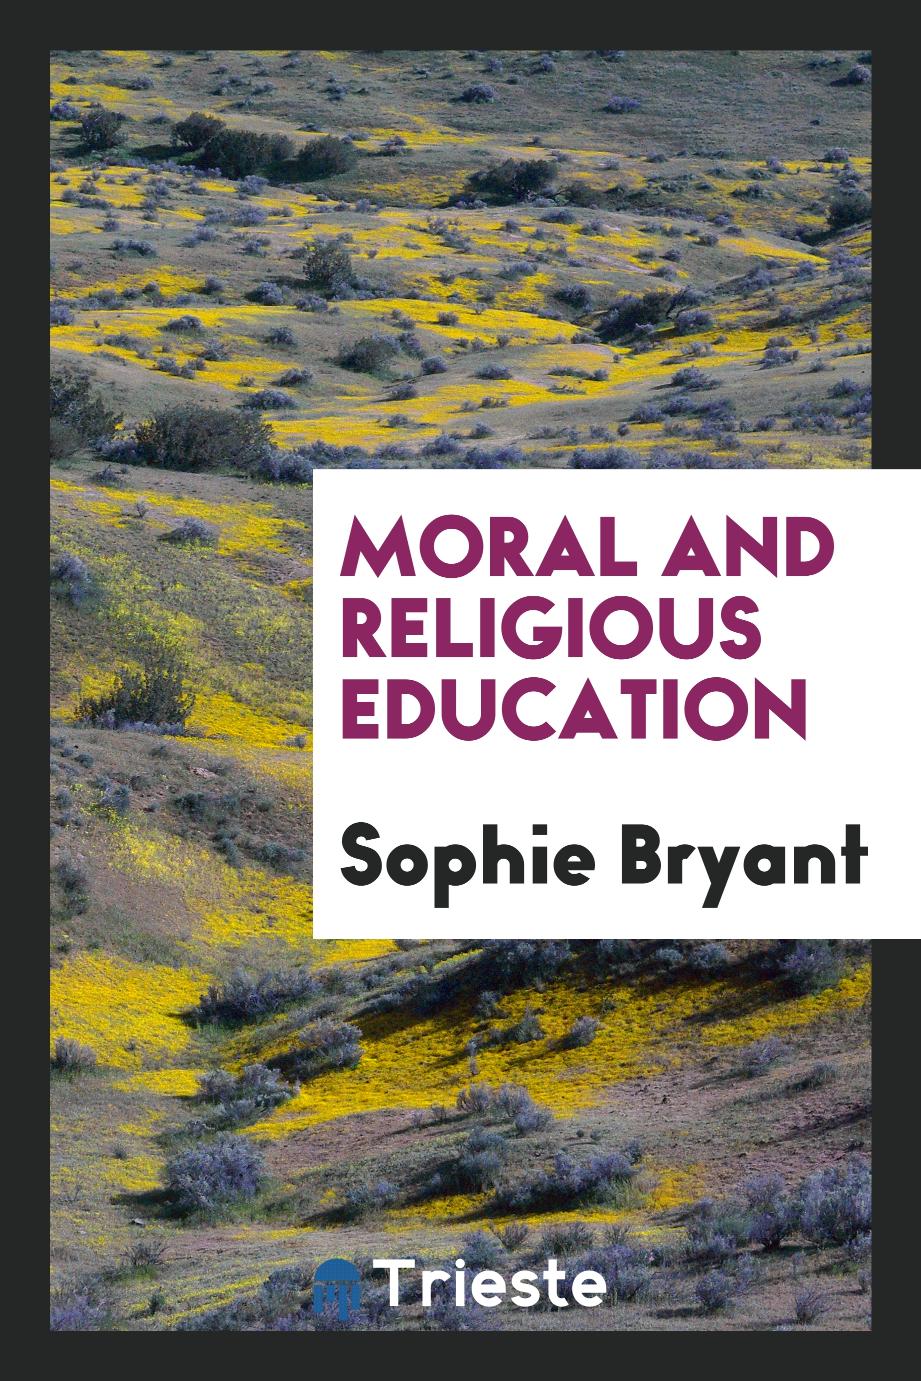 Moral and religious education